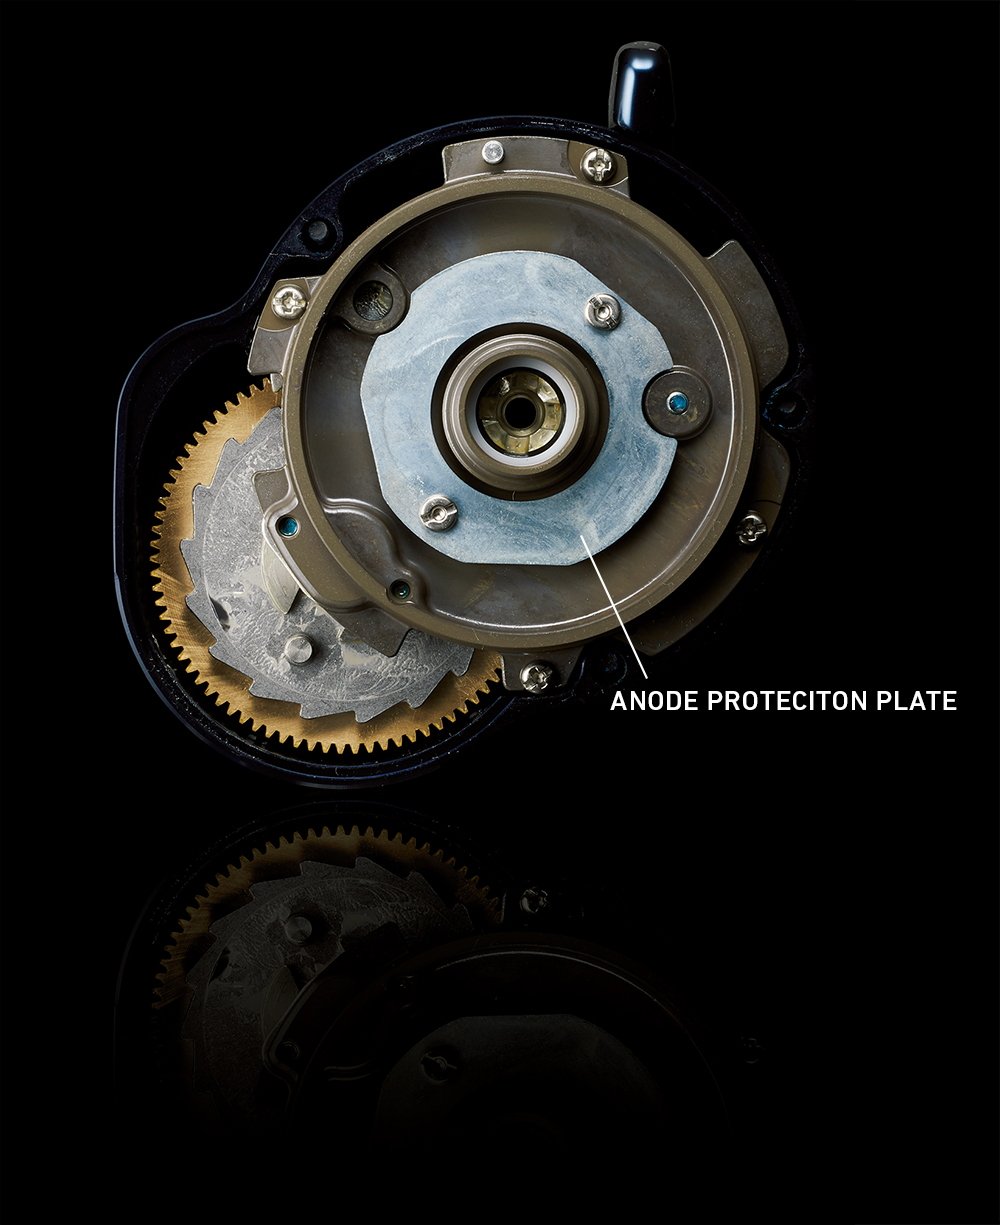 ANODE PROTECTION